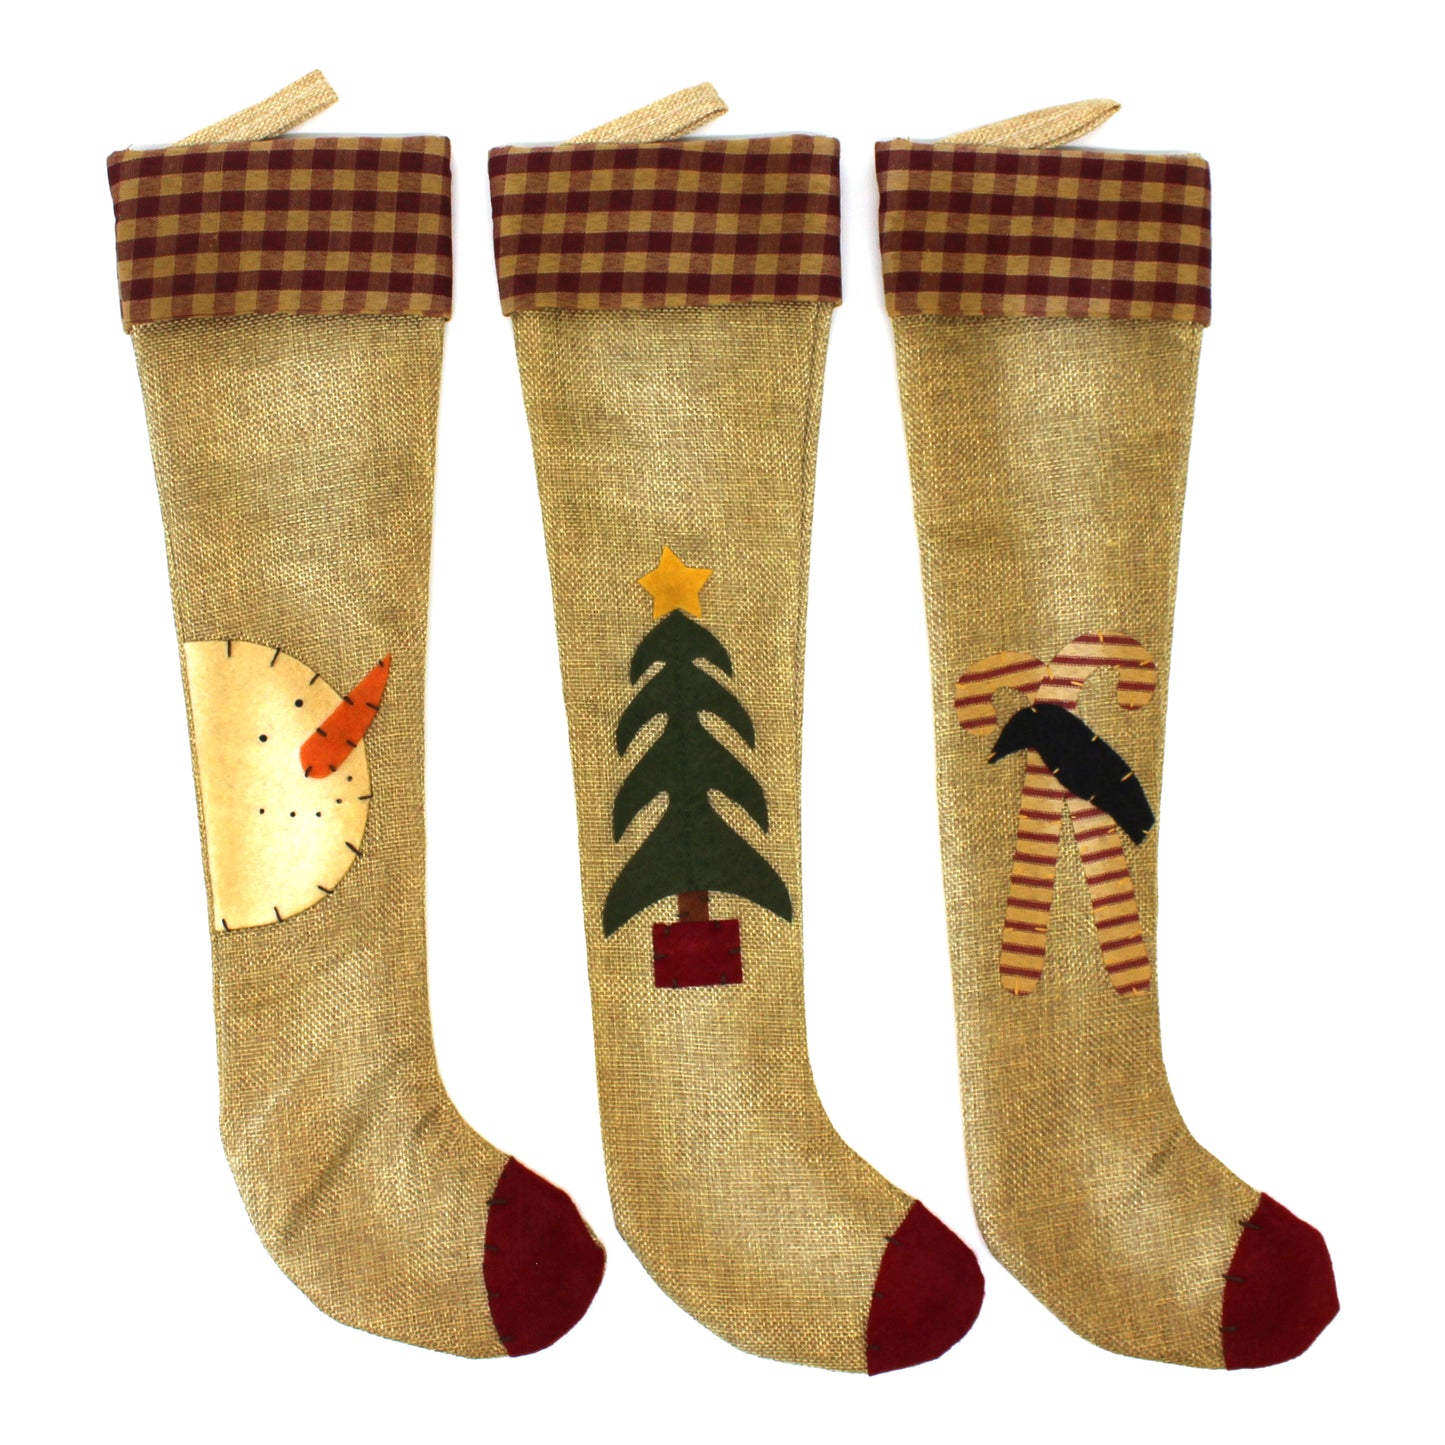 CVHOMEDECO. Primitives Rustic Design 18 Inch Christmas Tree Hanging Stockings Vintage Snowman, Tree, Crow and Candy Cane Xmas Hanging Decoration Gifts, 3 Assorted